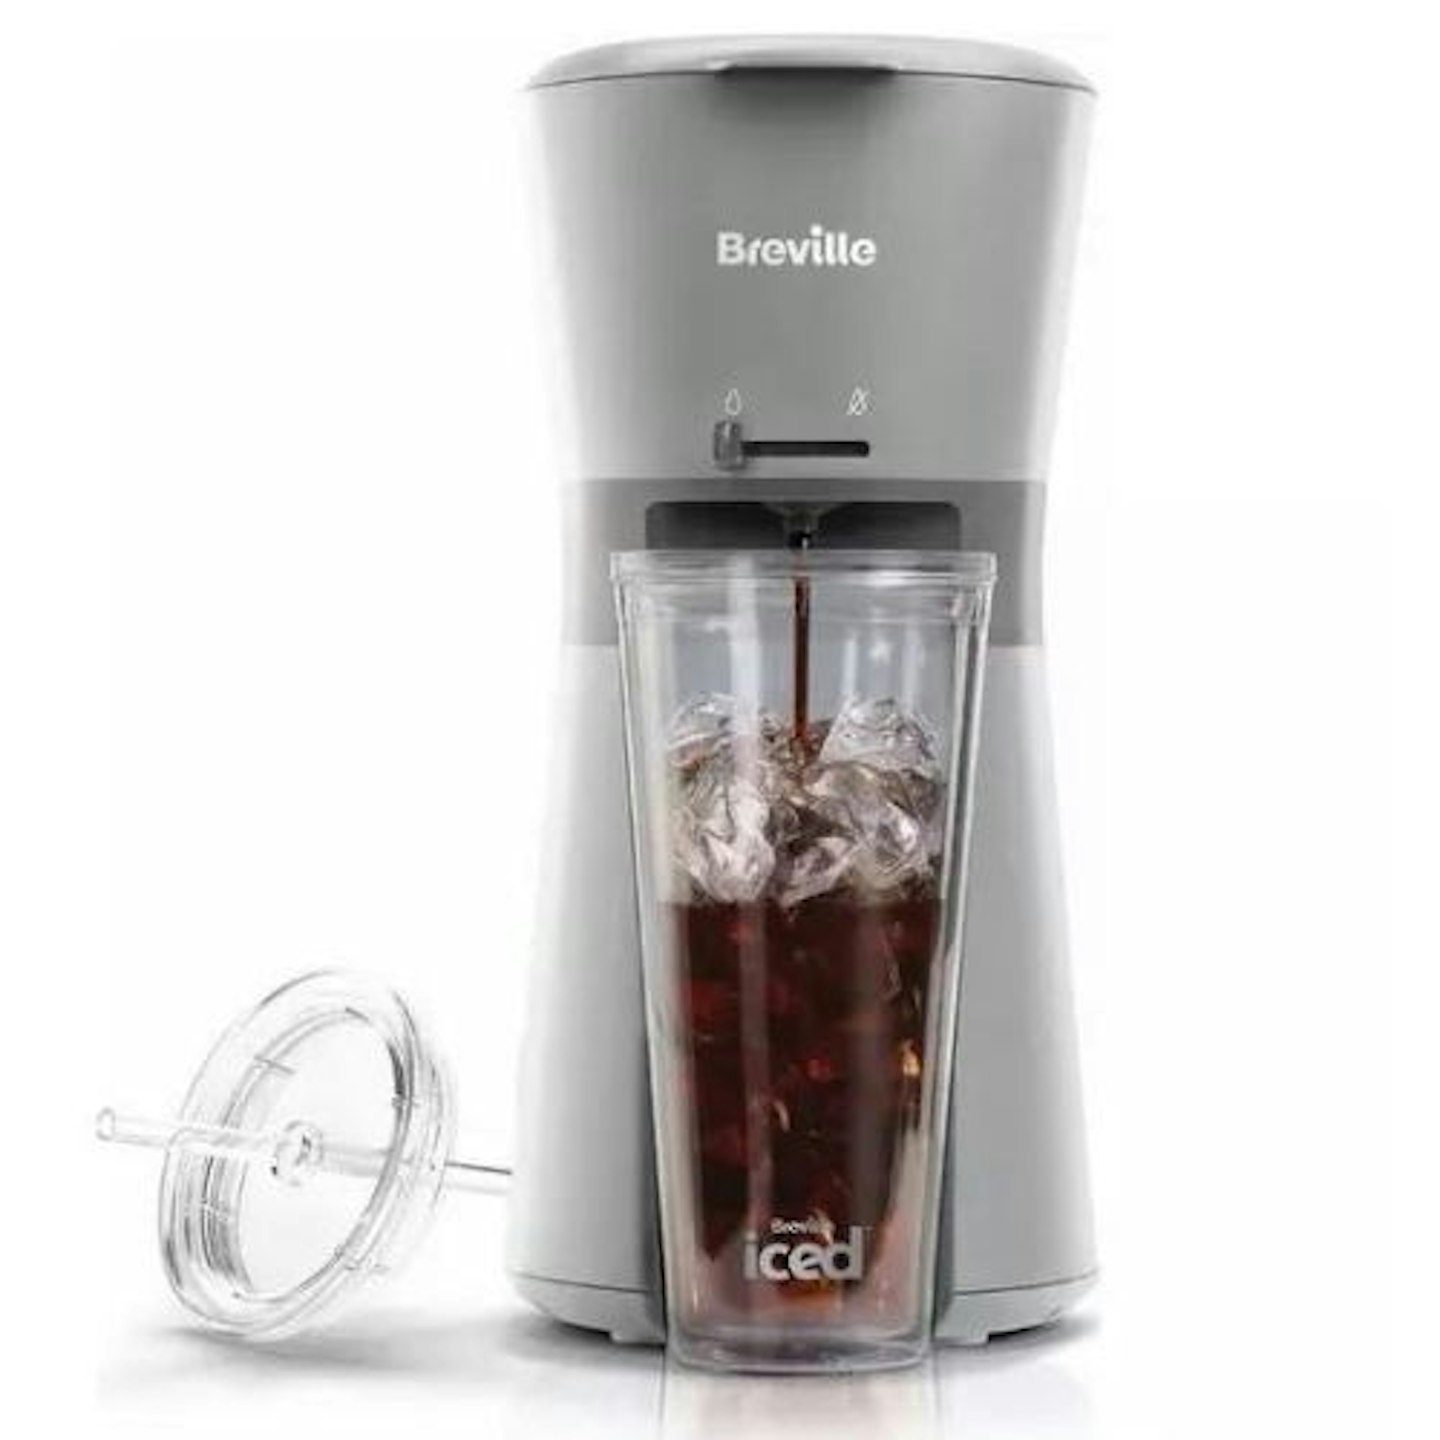 BREVILLE VCF155 Iced Coffee Machine